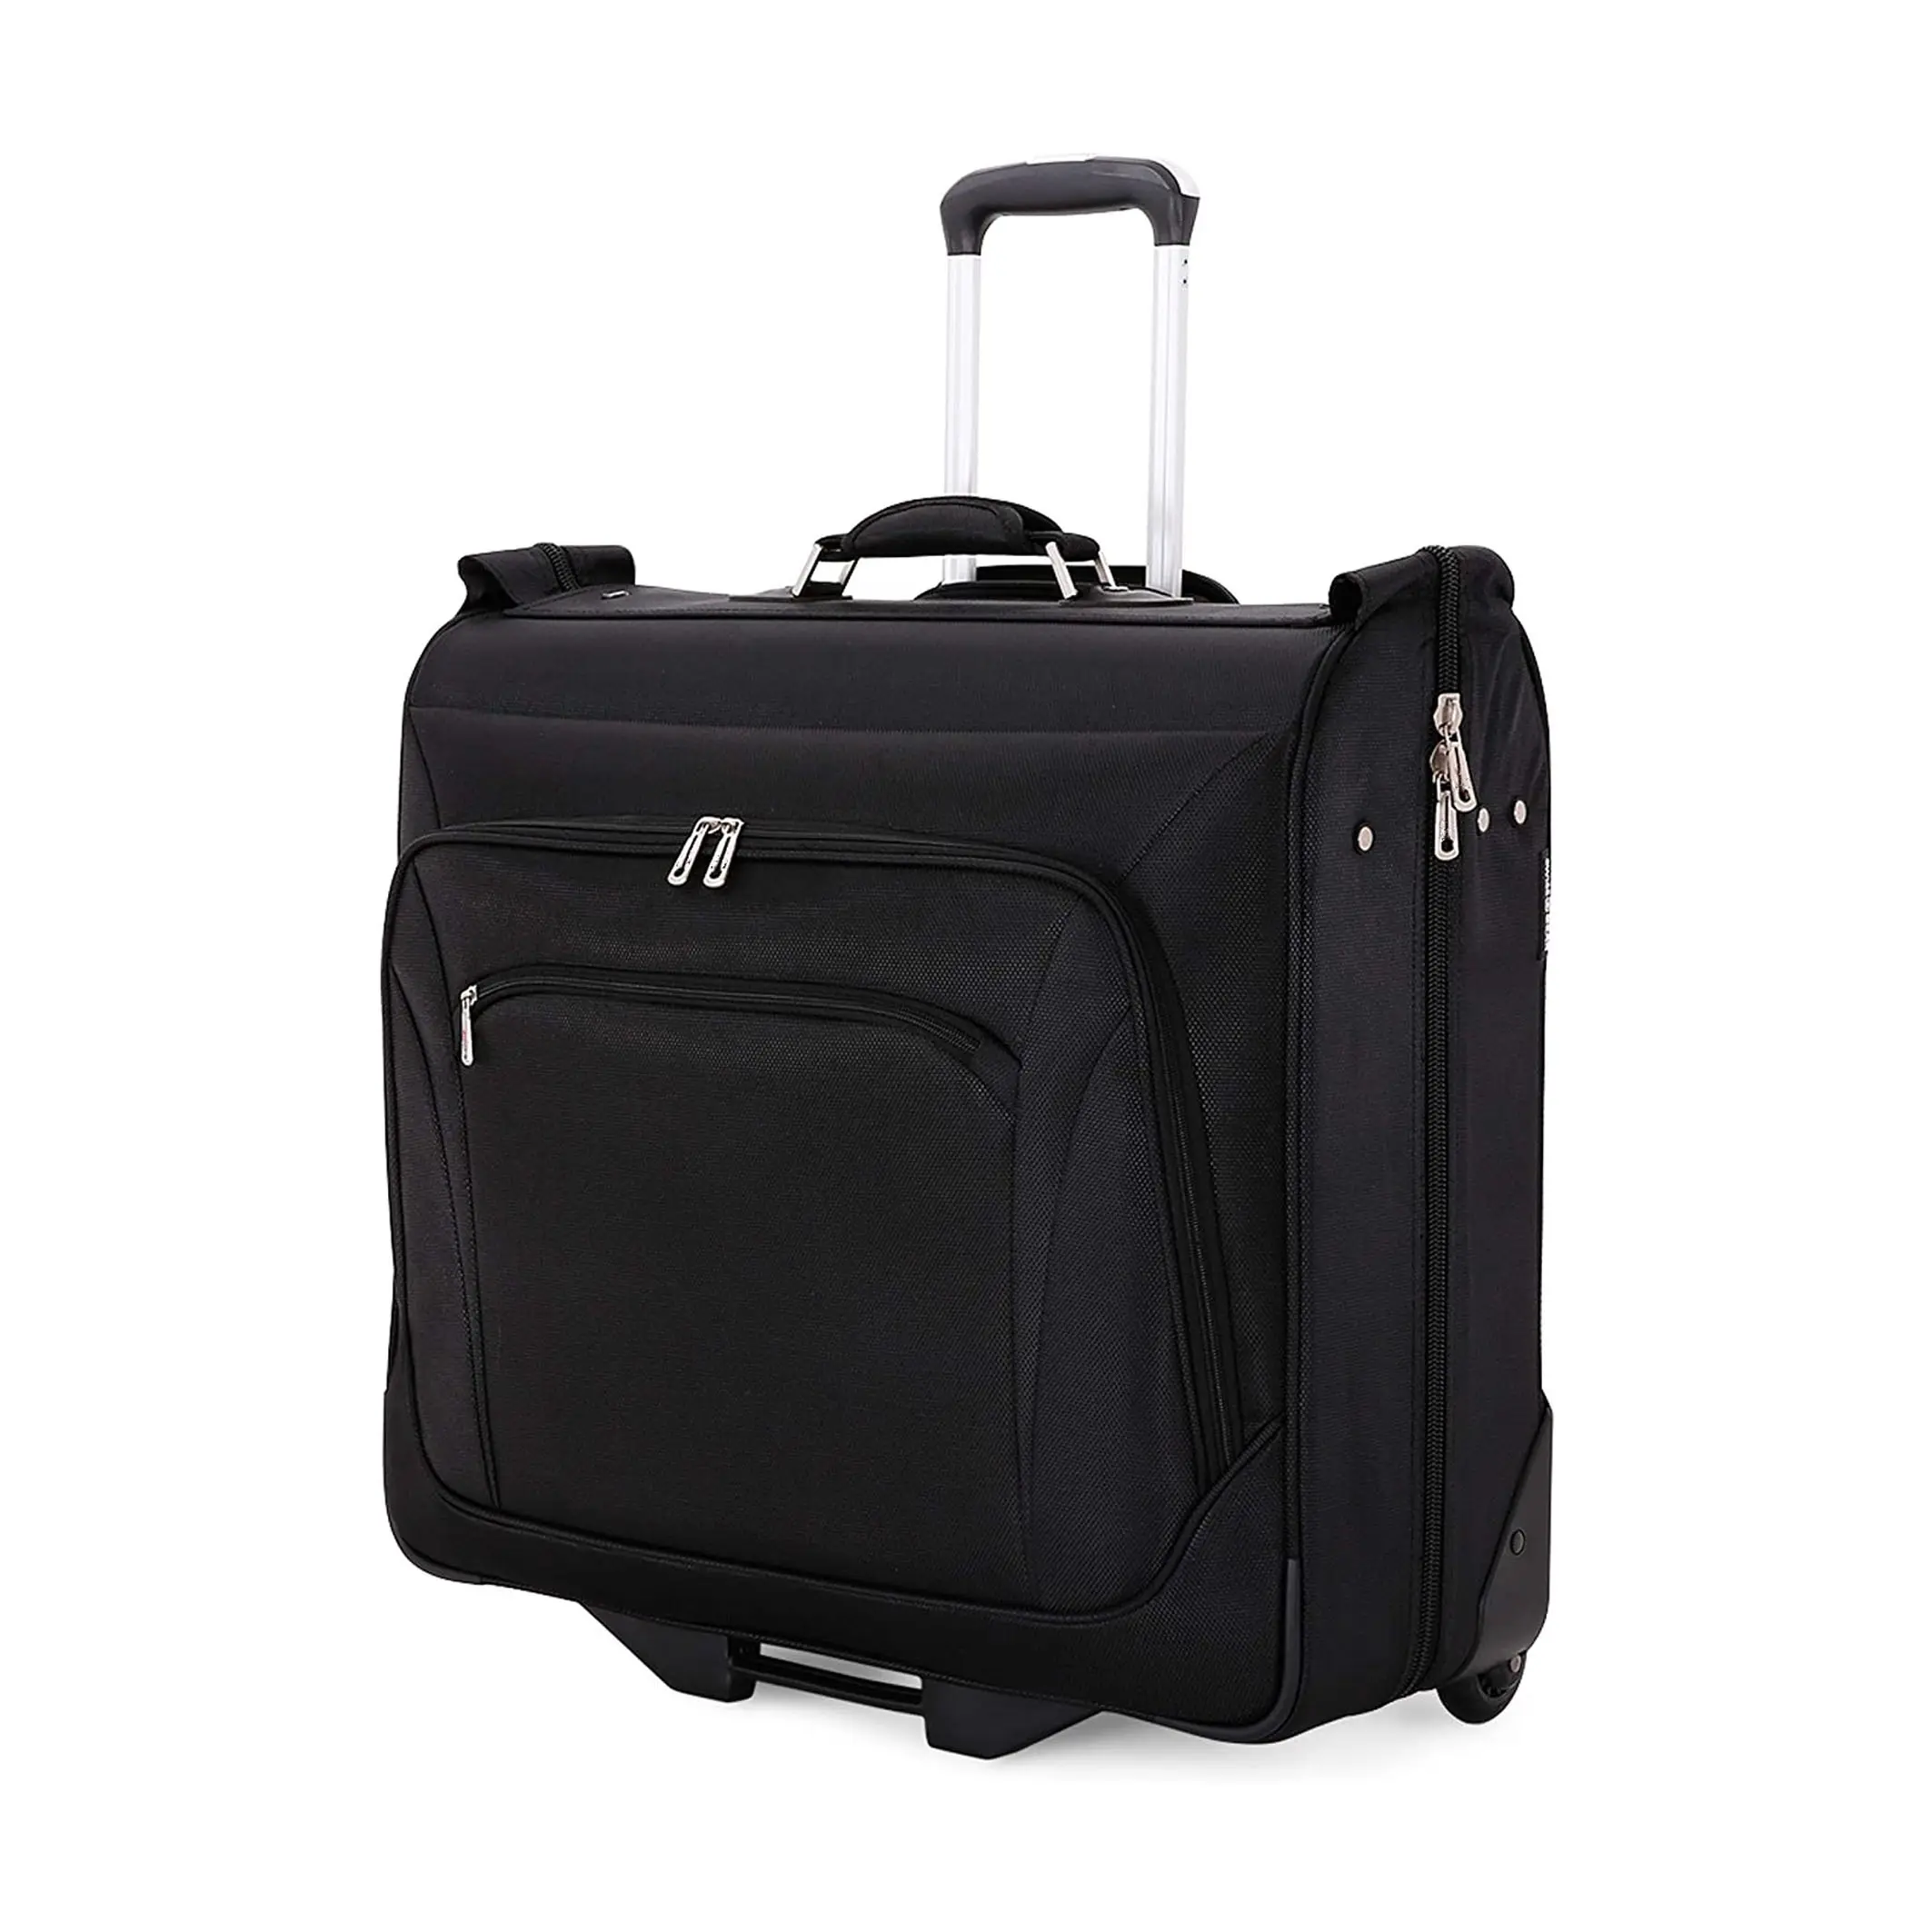 Cabine Rolling Suitcase Business Oxford trolley luggage case